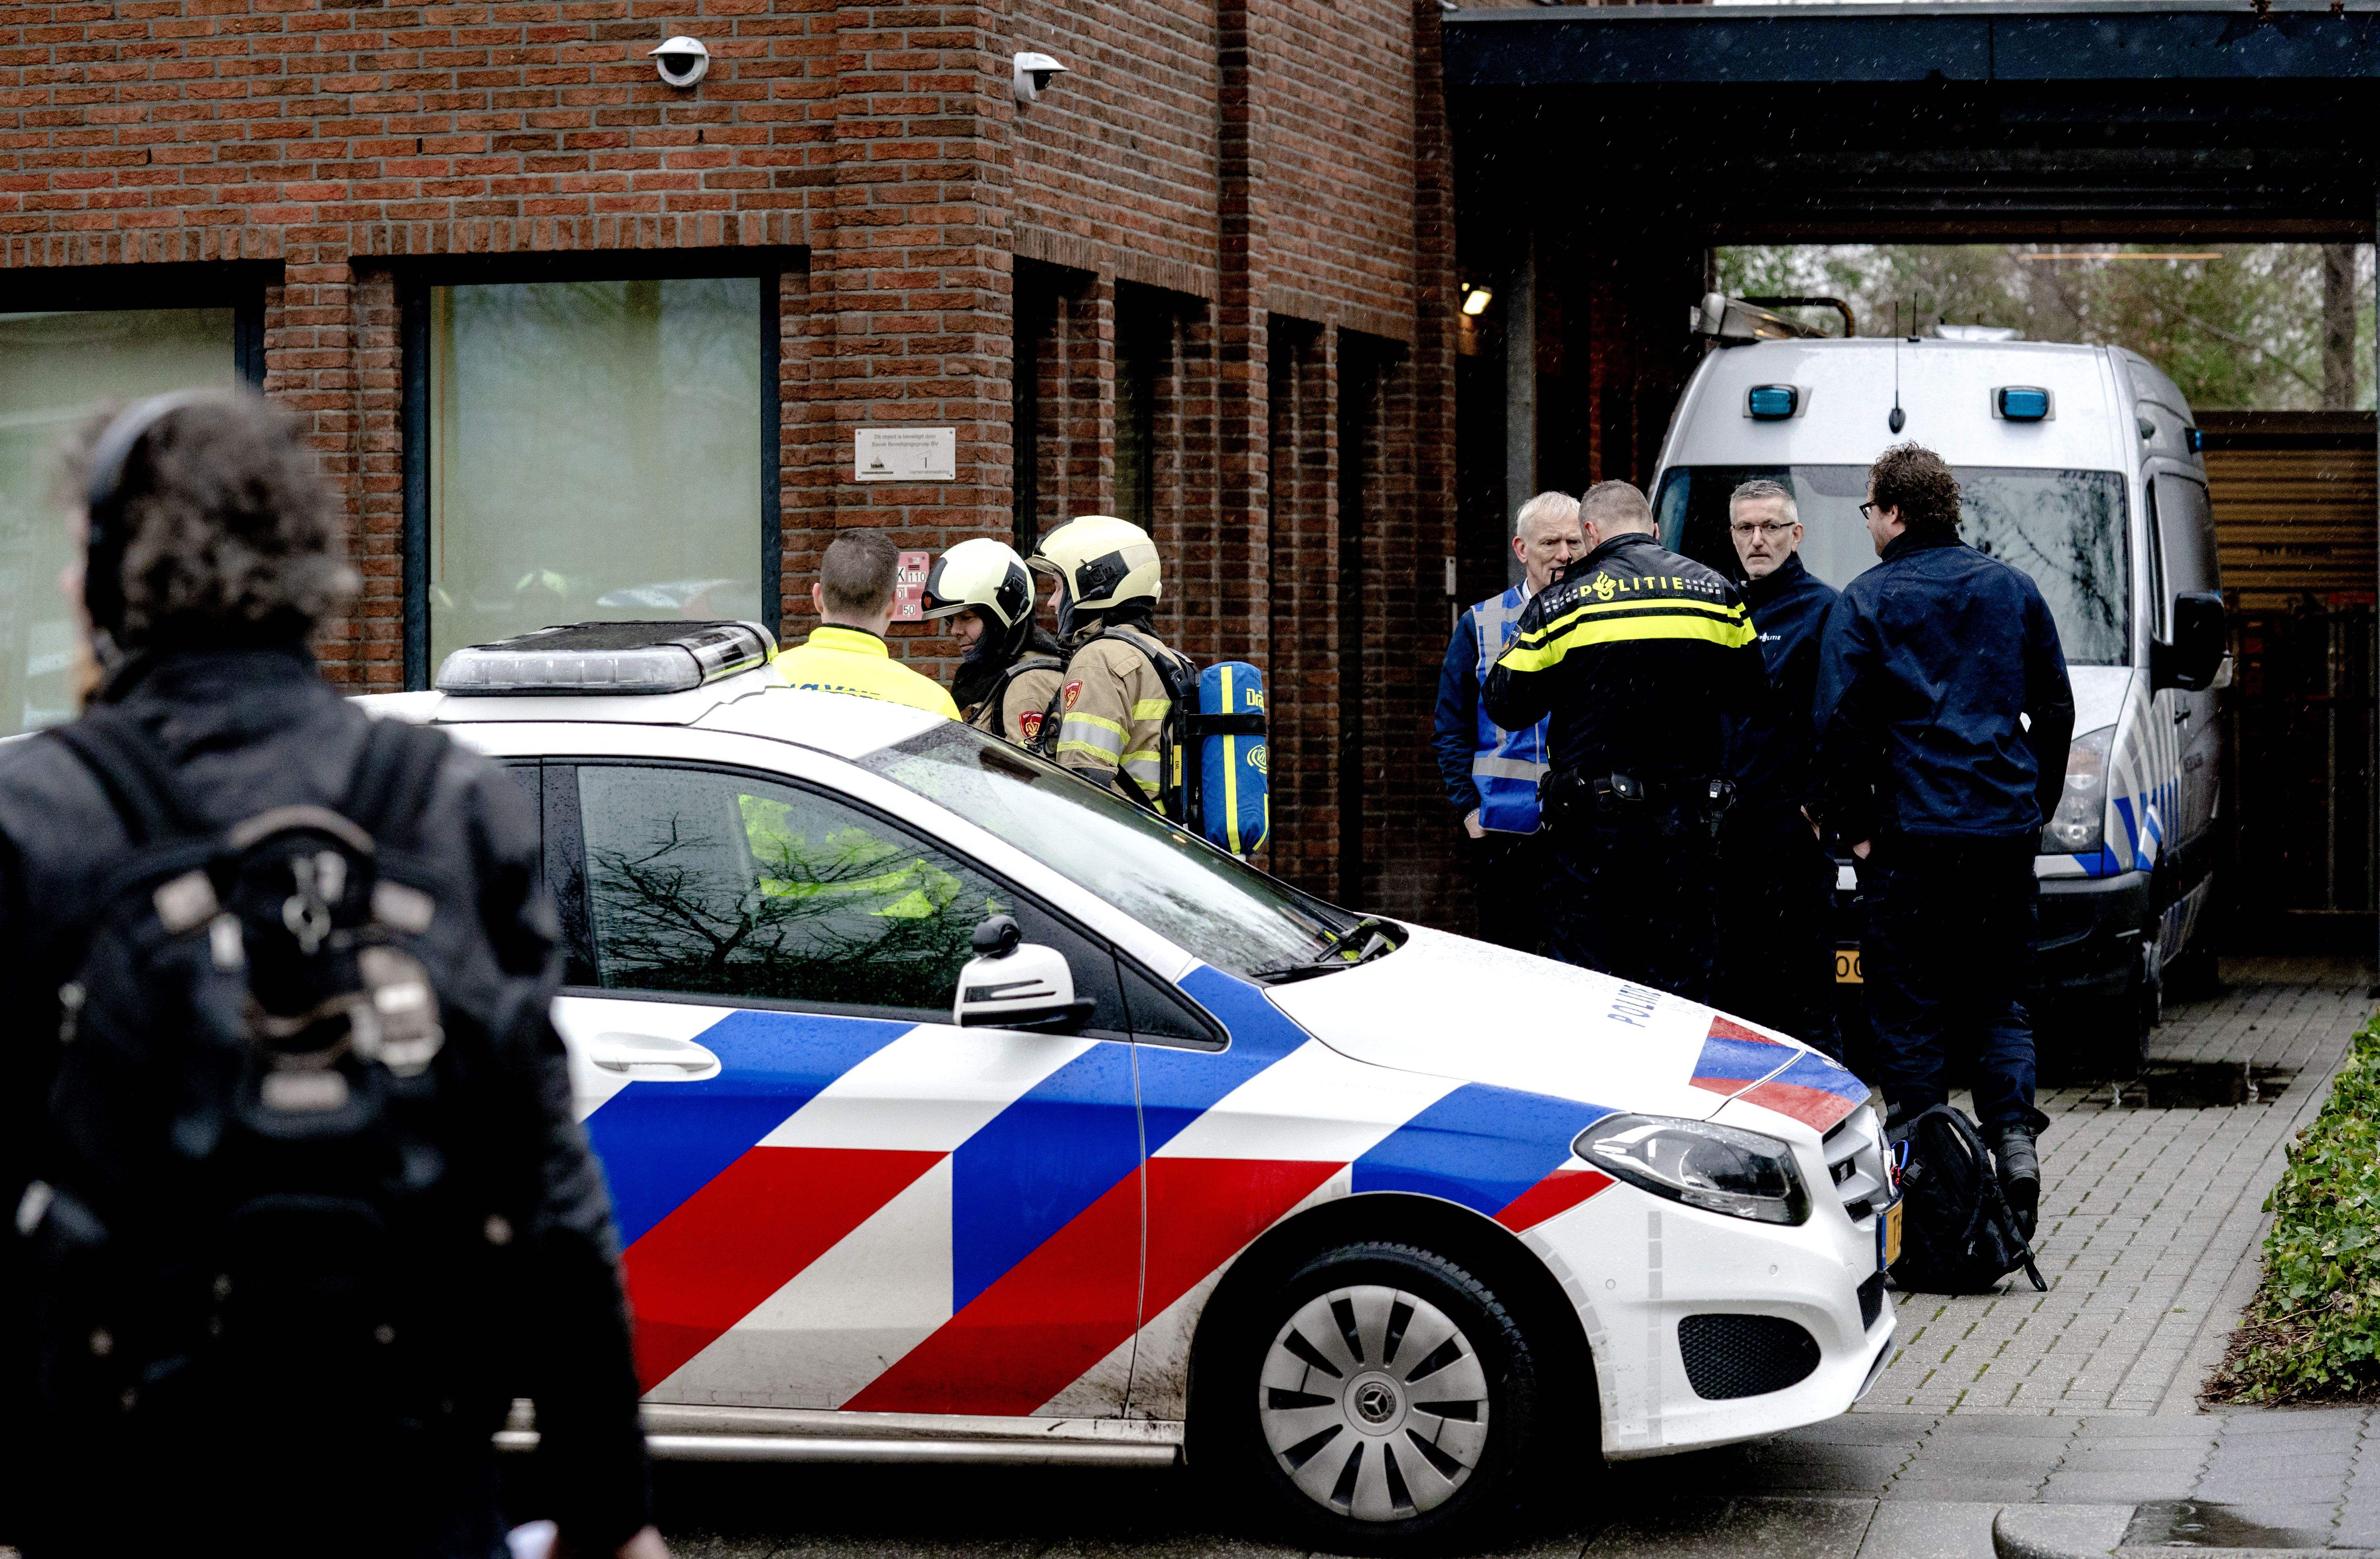 Dutch police and emergency personnel gather during the investigation of a suspicious letter which was delivered to Unisys Payment Services in Leusden on 13 February, 2020. Dutch police have arrested an alleged gang leader likened to ‘El Chapo’.